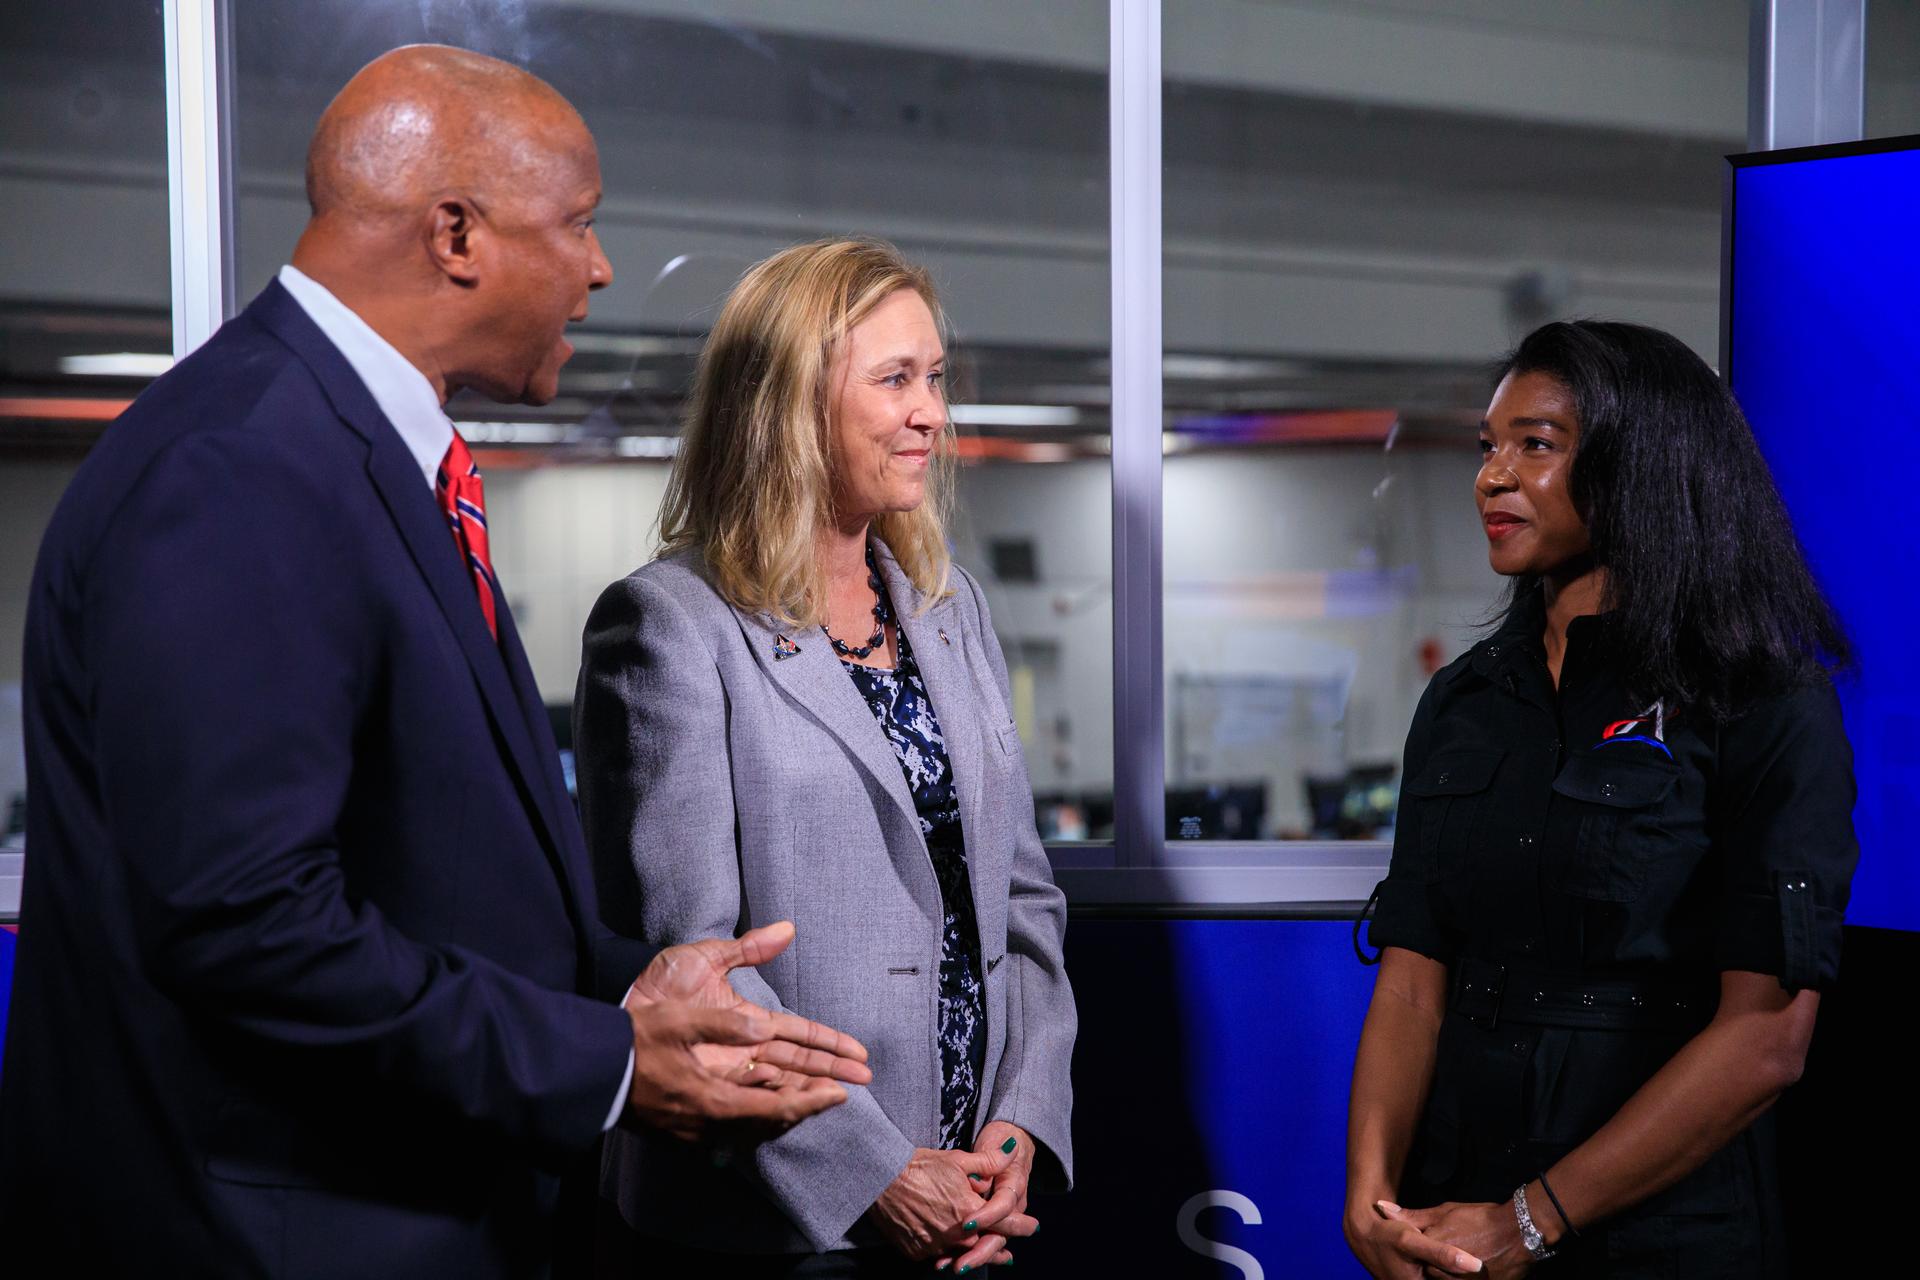 Jasmine Hopkins, NASA Communications, speaks with Kelvin Manning, deputy director, and Janet Petro, director of Kennedy Space Center.